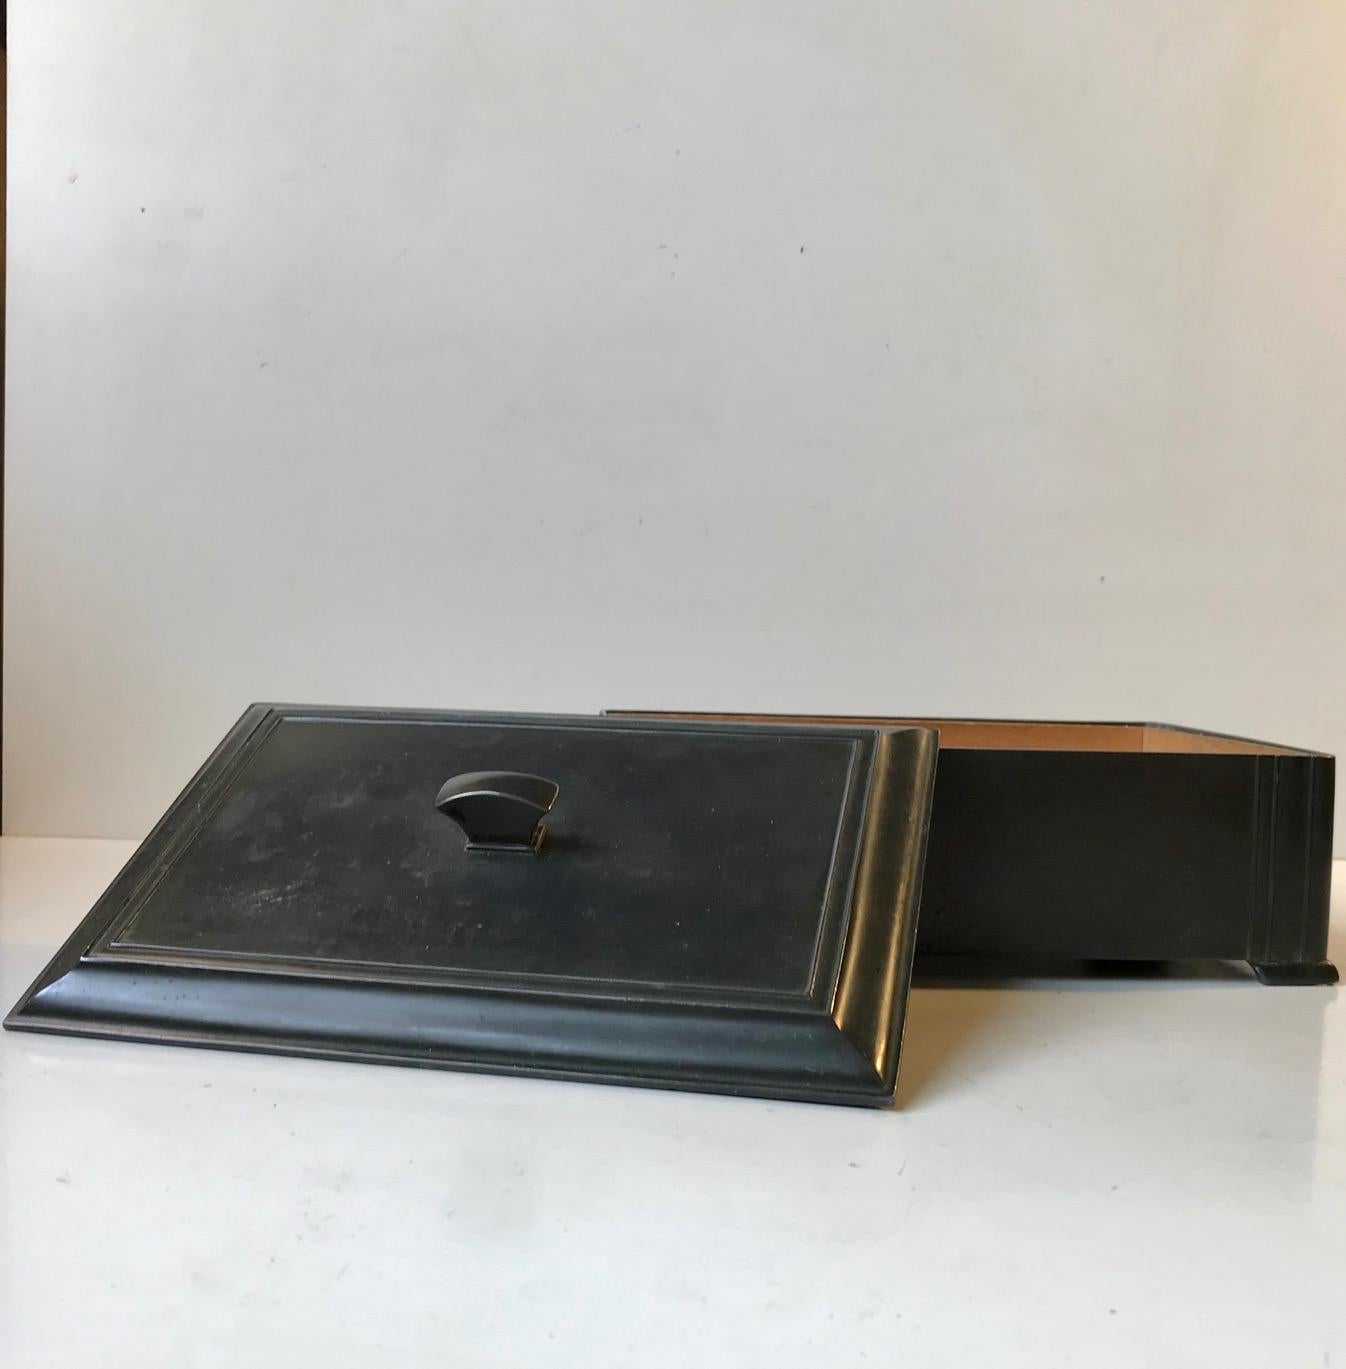 Art Deco cigar box with architectural details. Designed by Just Andersen for his own company Just and manufactured in Denmark during the 1930s. Its Made from Just's own invention Disko Metal: an alloy of bronze, pewter and a few secret ingrediens.